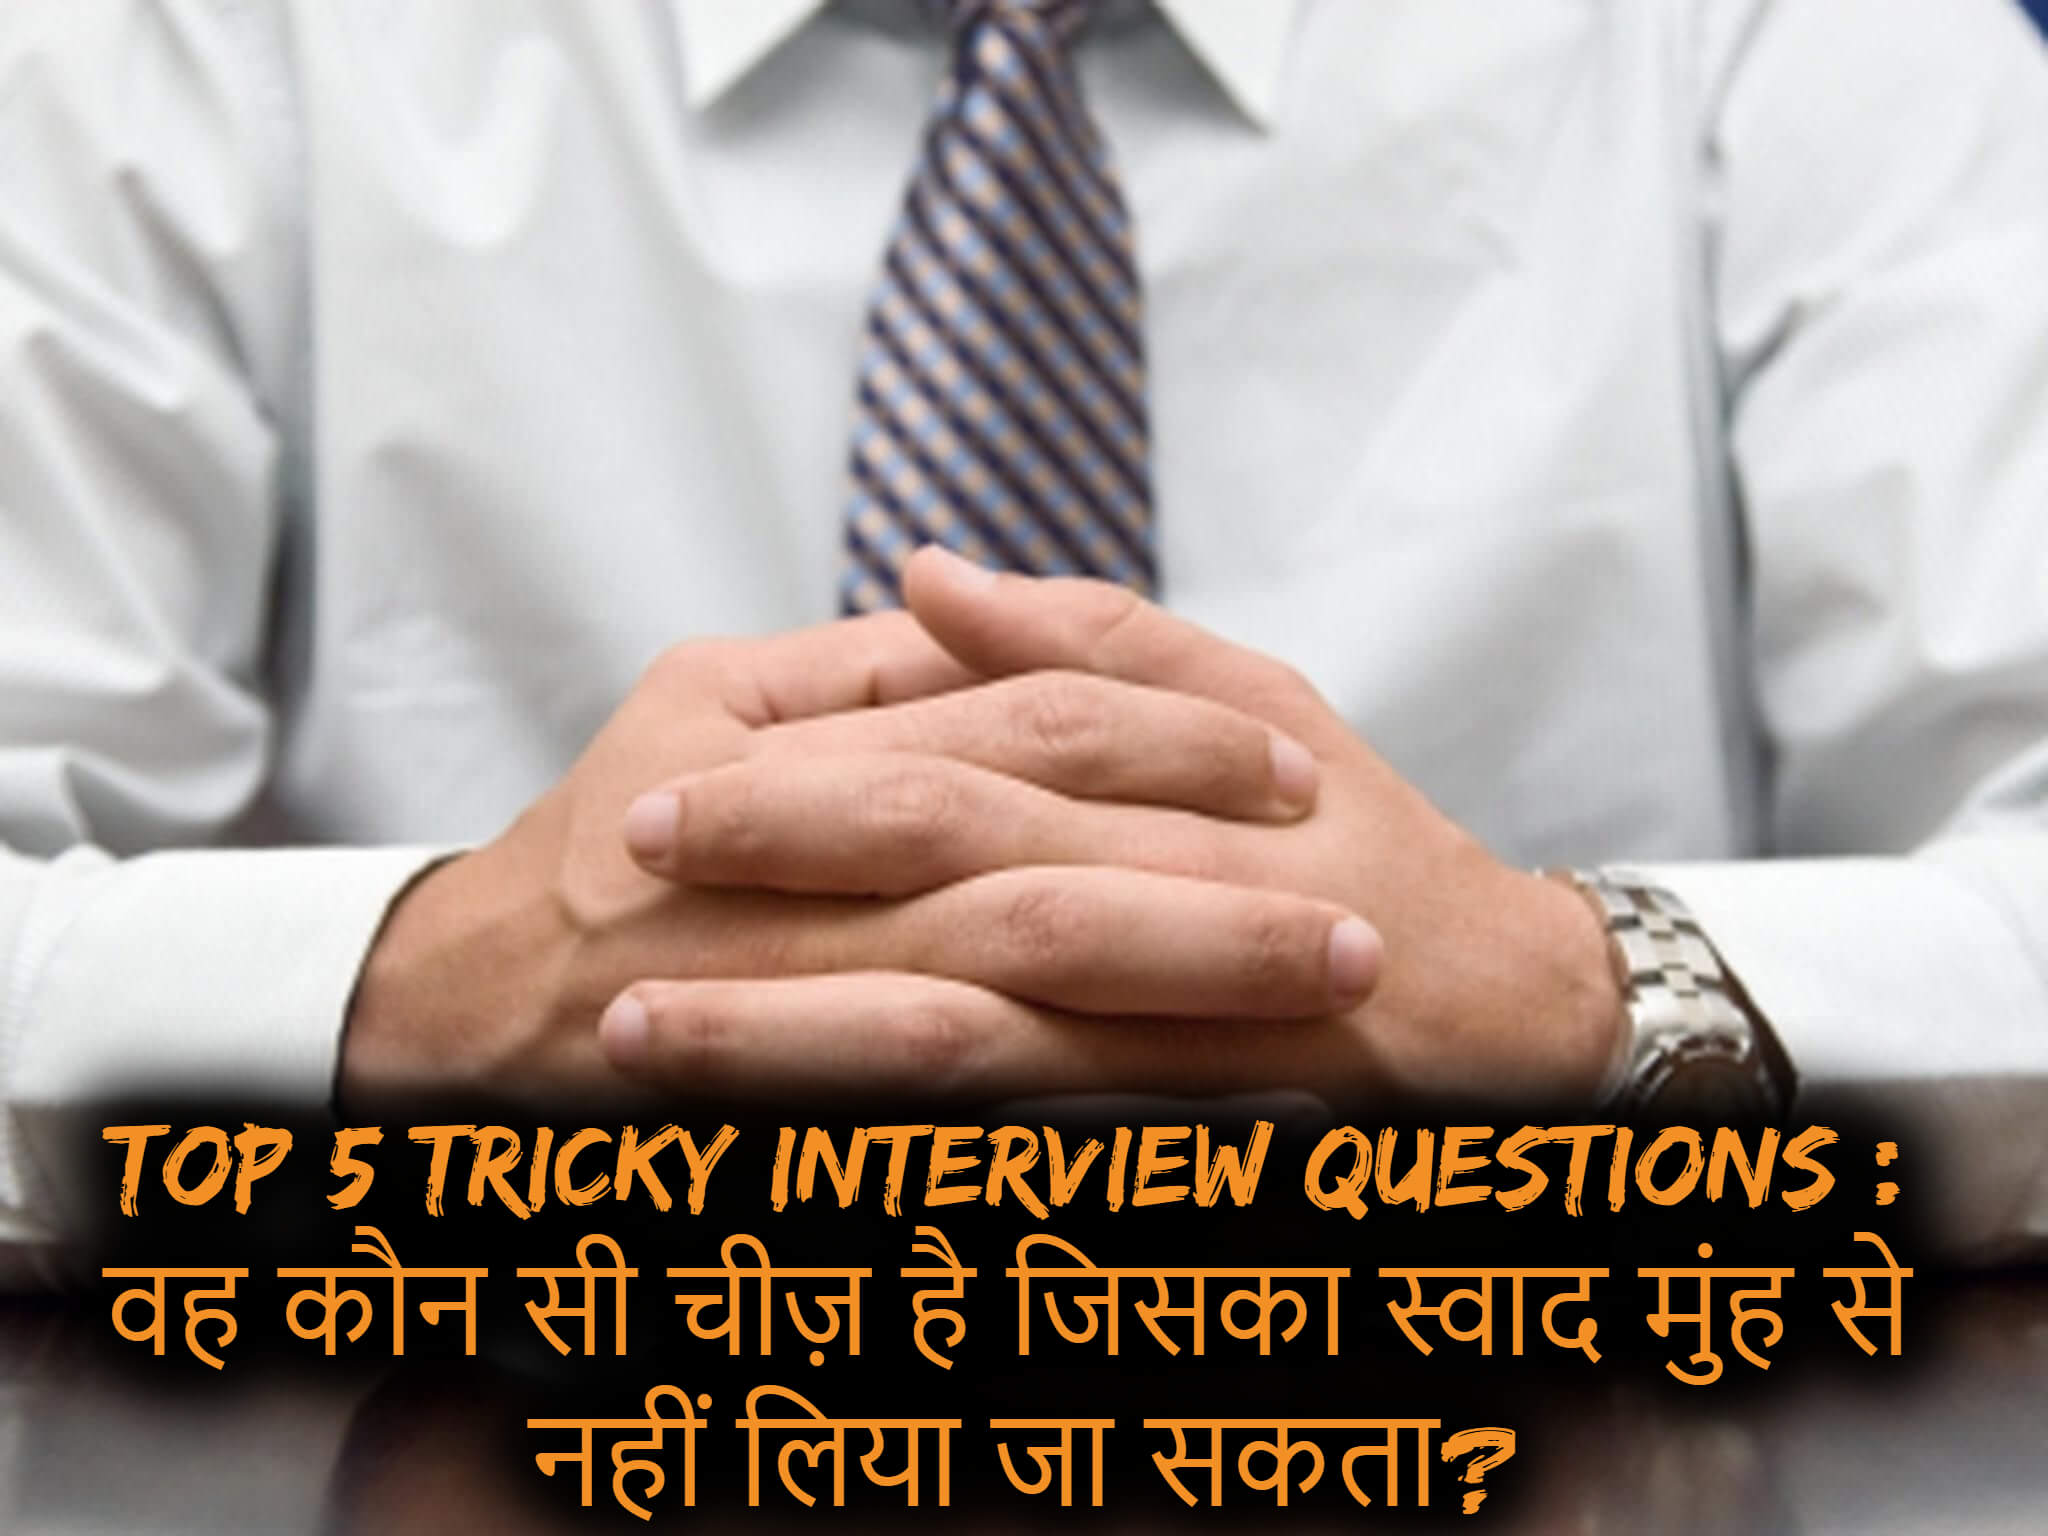 Top 5 Tricky Interview Questions